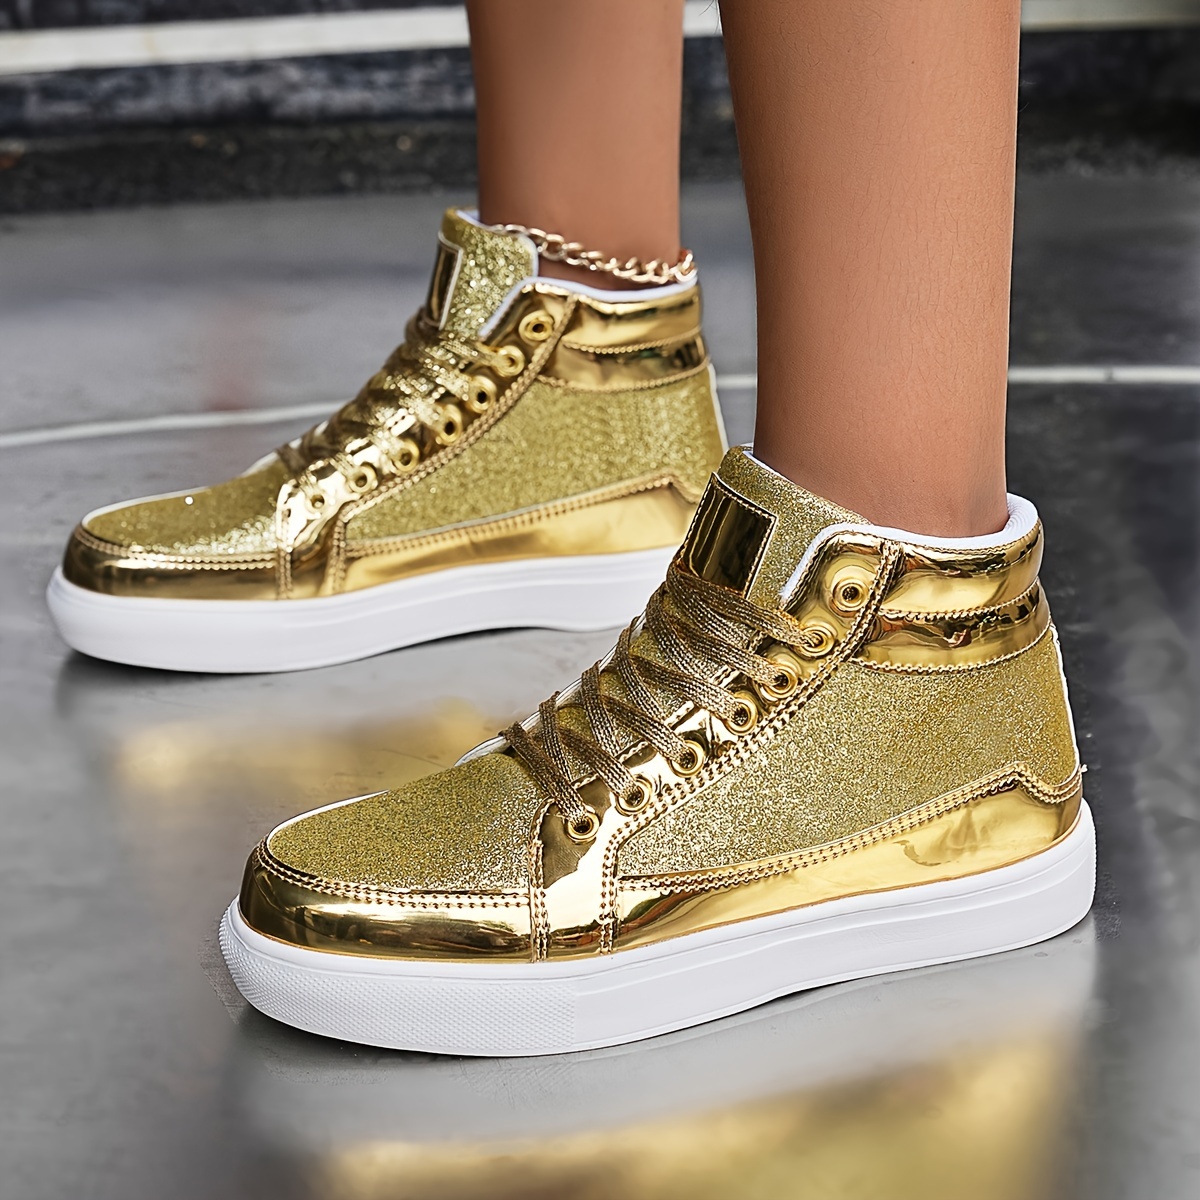 Sequin Decor Glitter Reflective High Top Skate Shoes, Flat Wear Resistance  Non Slip Sneakers, Casual Versatile Outdoor Walking Shoes for Music Festiva